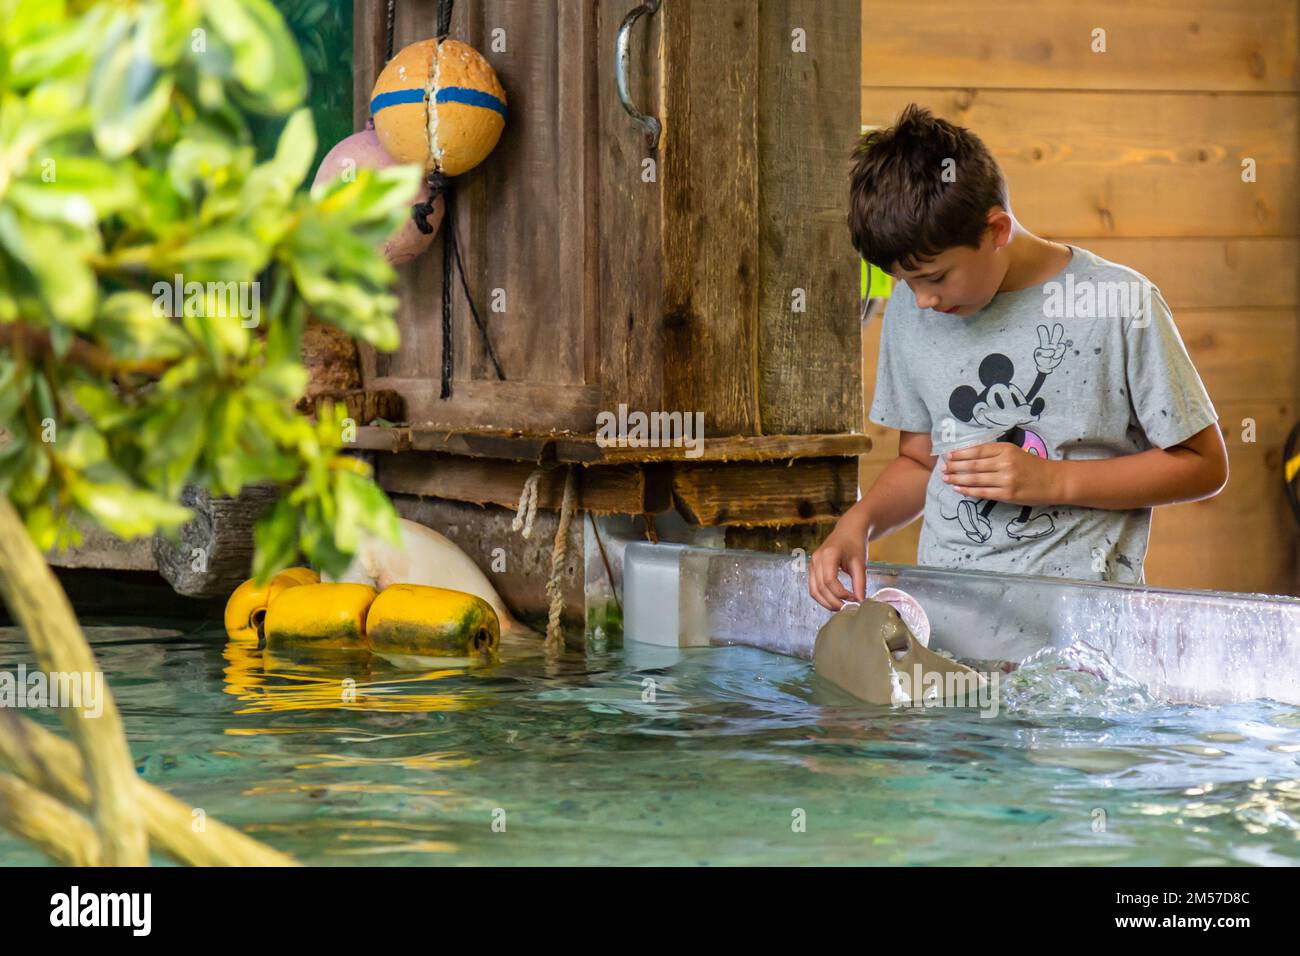 A young boy feeds a cownose ray in the stingray exhibit at the Fort Wayne Children's Zoo in Fort Wayne, Indiana, USA. Stock Photo